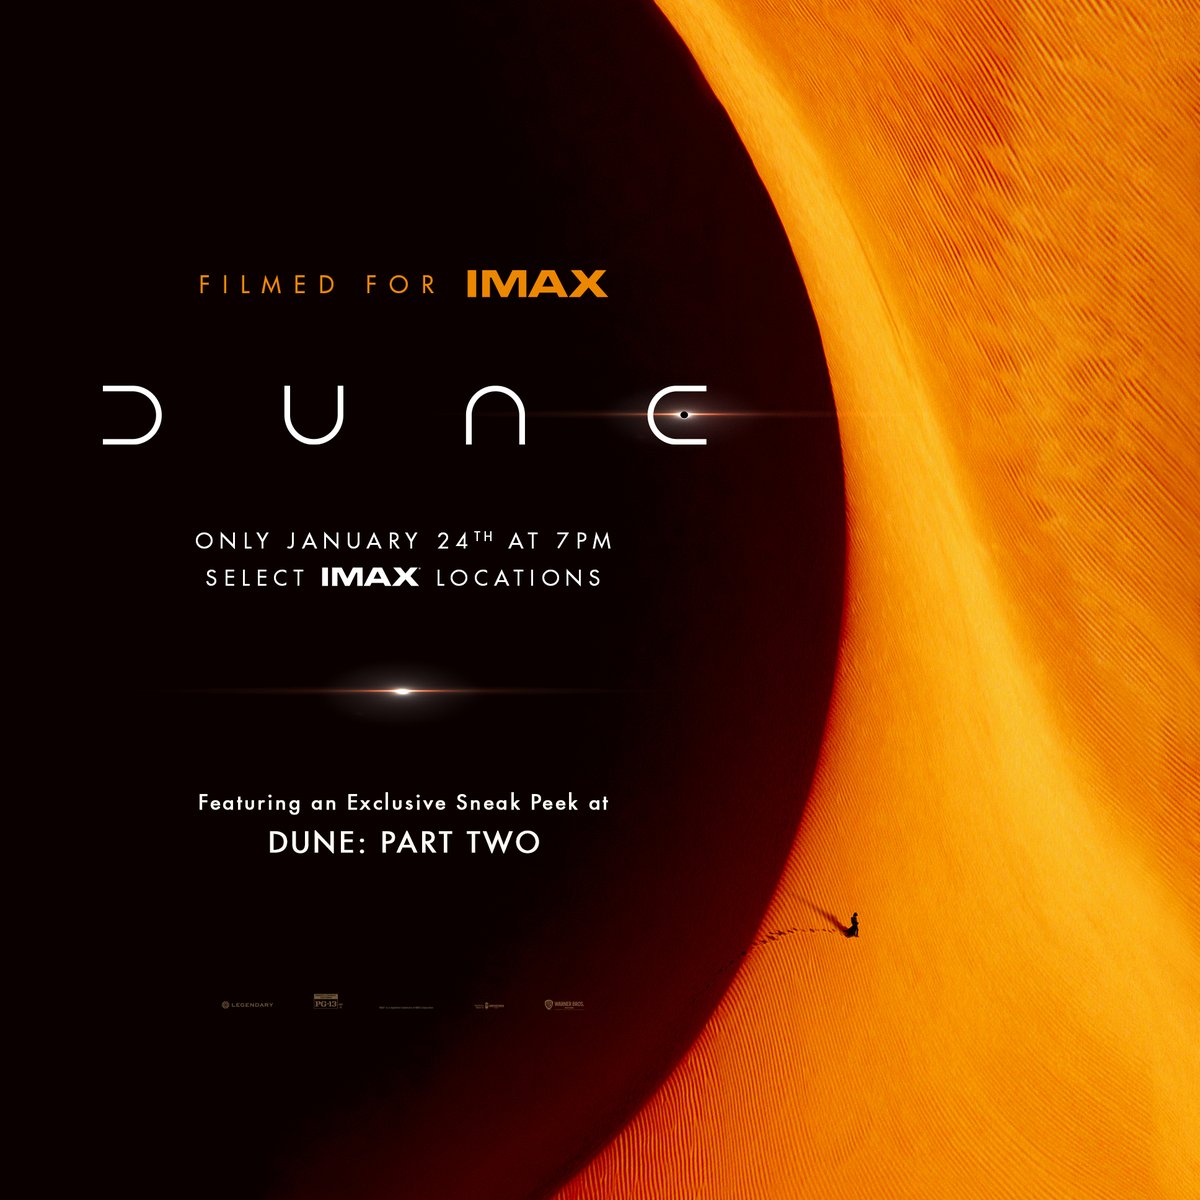 #DuneMovie returns in IMAX at #AMCTheatres for ONE NIGHT ONLY! 
On January 24, experience Denis Villeneuve’s film the way it was meant to be seen, plus a sneak peek at #DunePartTwo. Locations are very limited. amc.film/420dU9S
#FilmedForIMAX